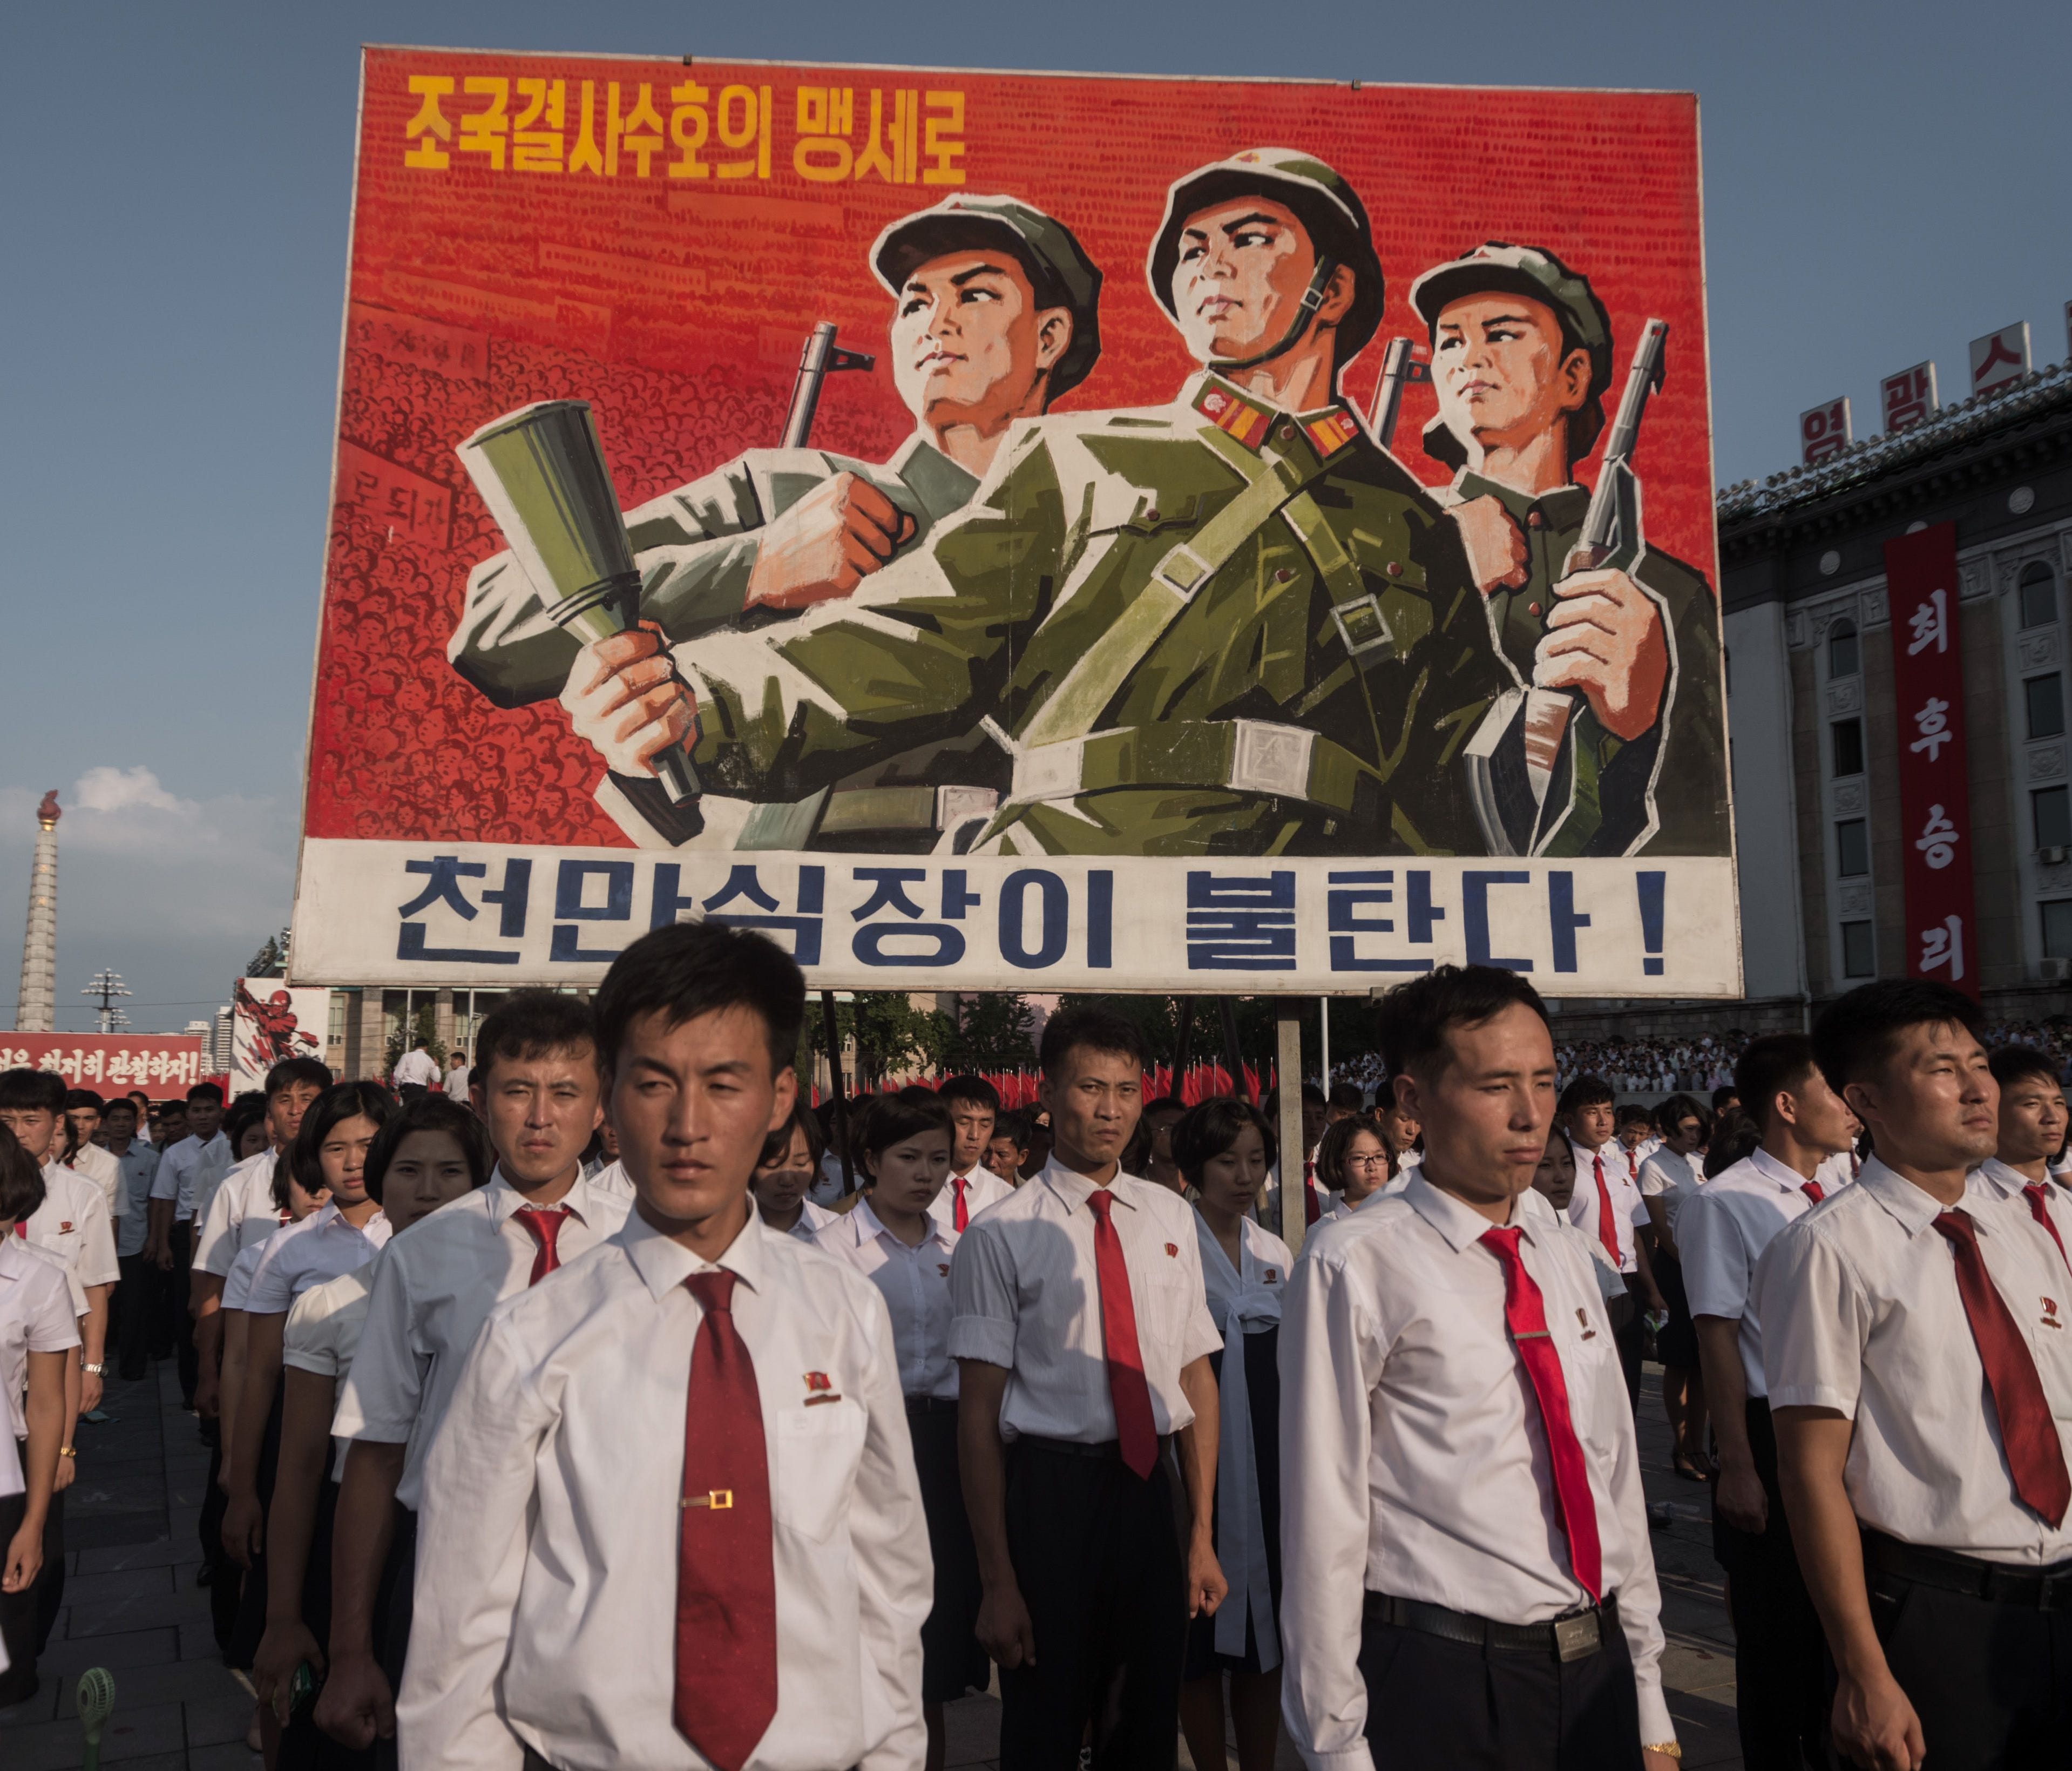 A propaganda poster is displayed during a rally in support of North Korea's stance against the U.S., on Kim Il-Sung square in Pyongyang on Aug. 9, 2017. U.S. President Donald Trump said the United States' nuclear arsenal was 